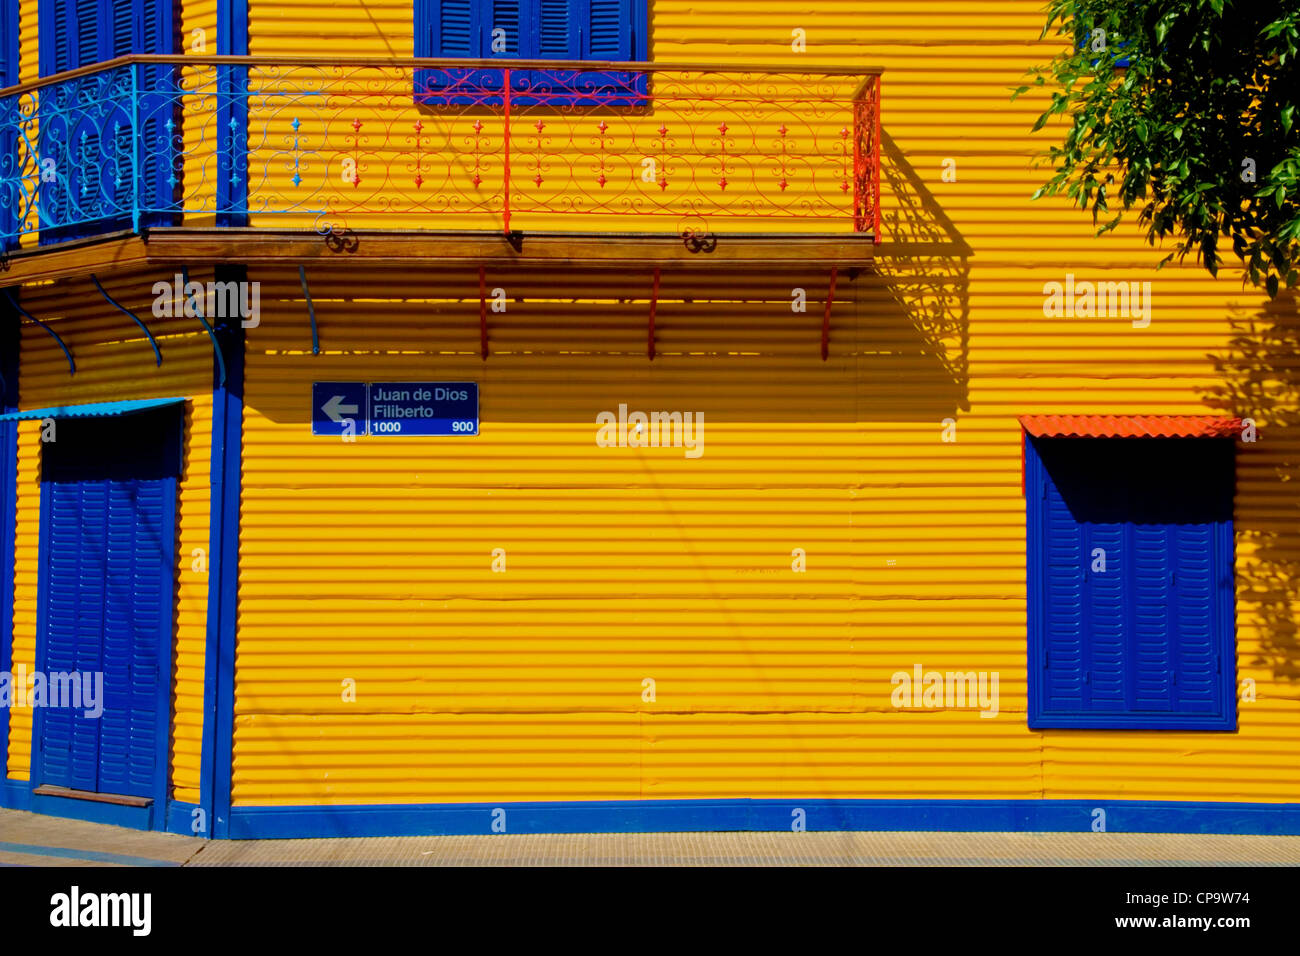 Colourful museum building with the colour's of Boca Juniors football team in the La Boca district of Buenos Aires, Argentina. Stock Photo